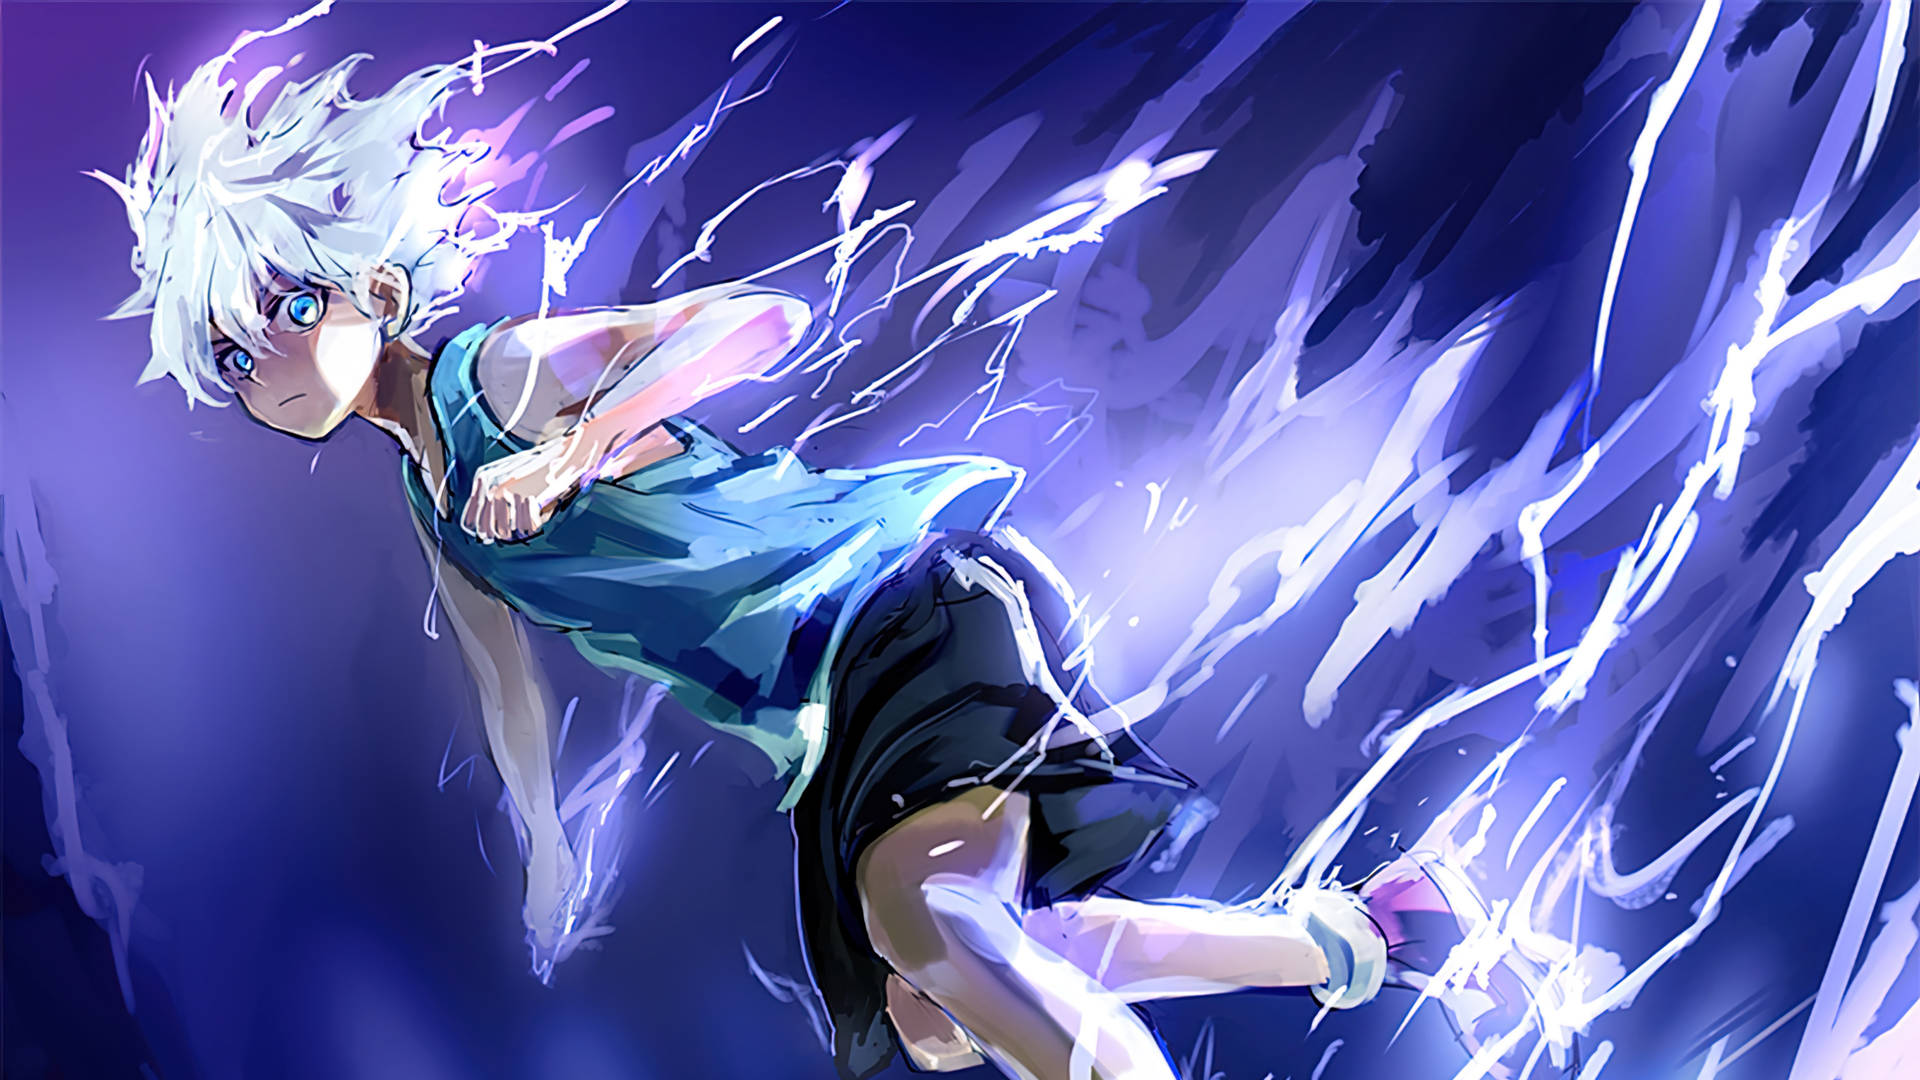 A Boy Is Running With Lightning In His Hands Background